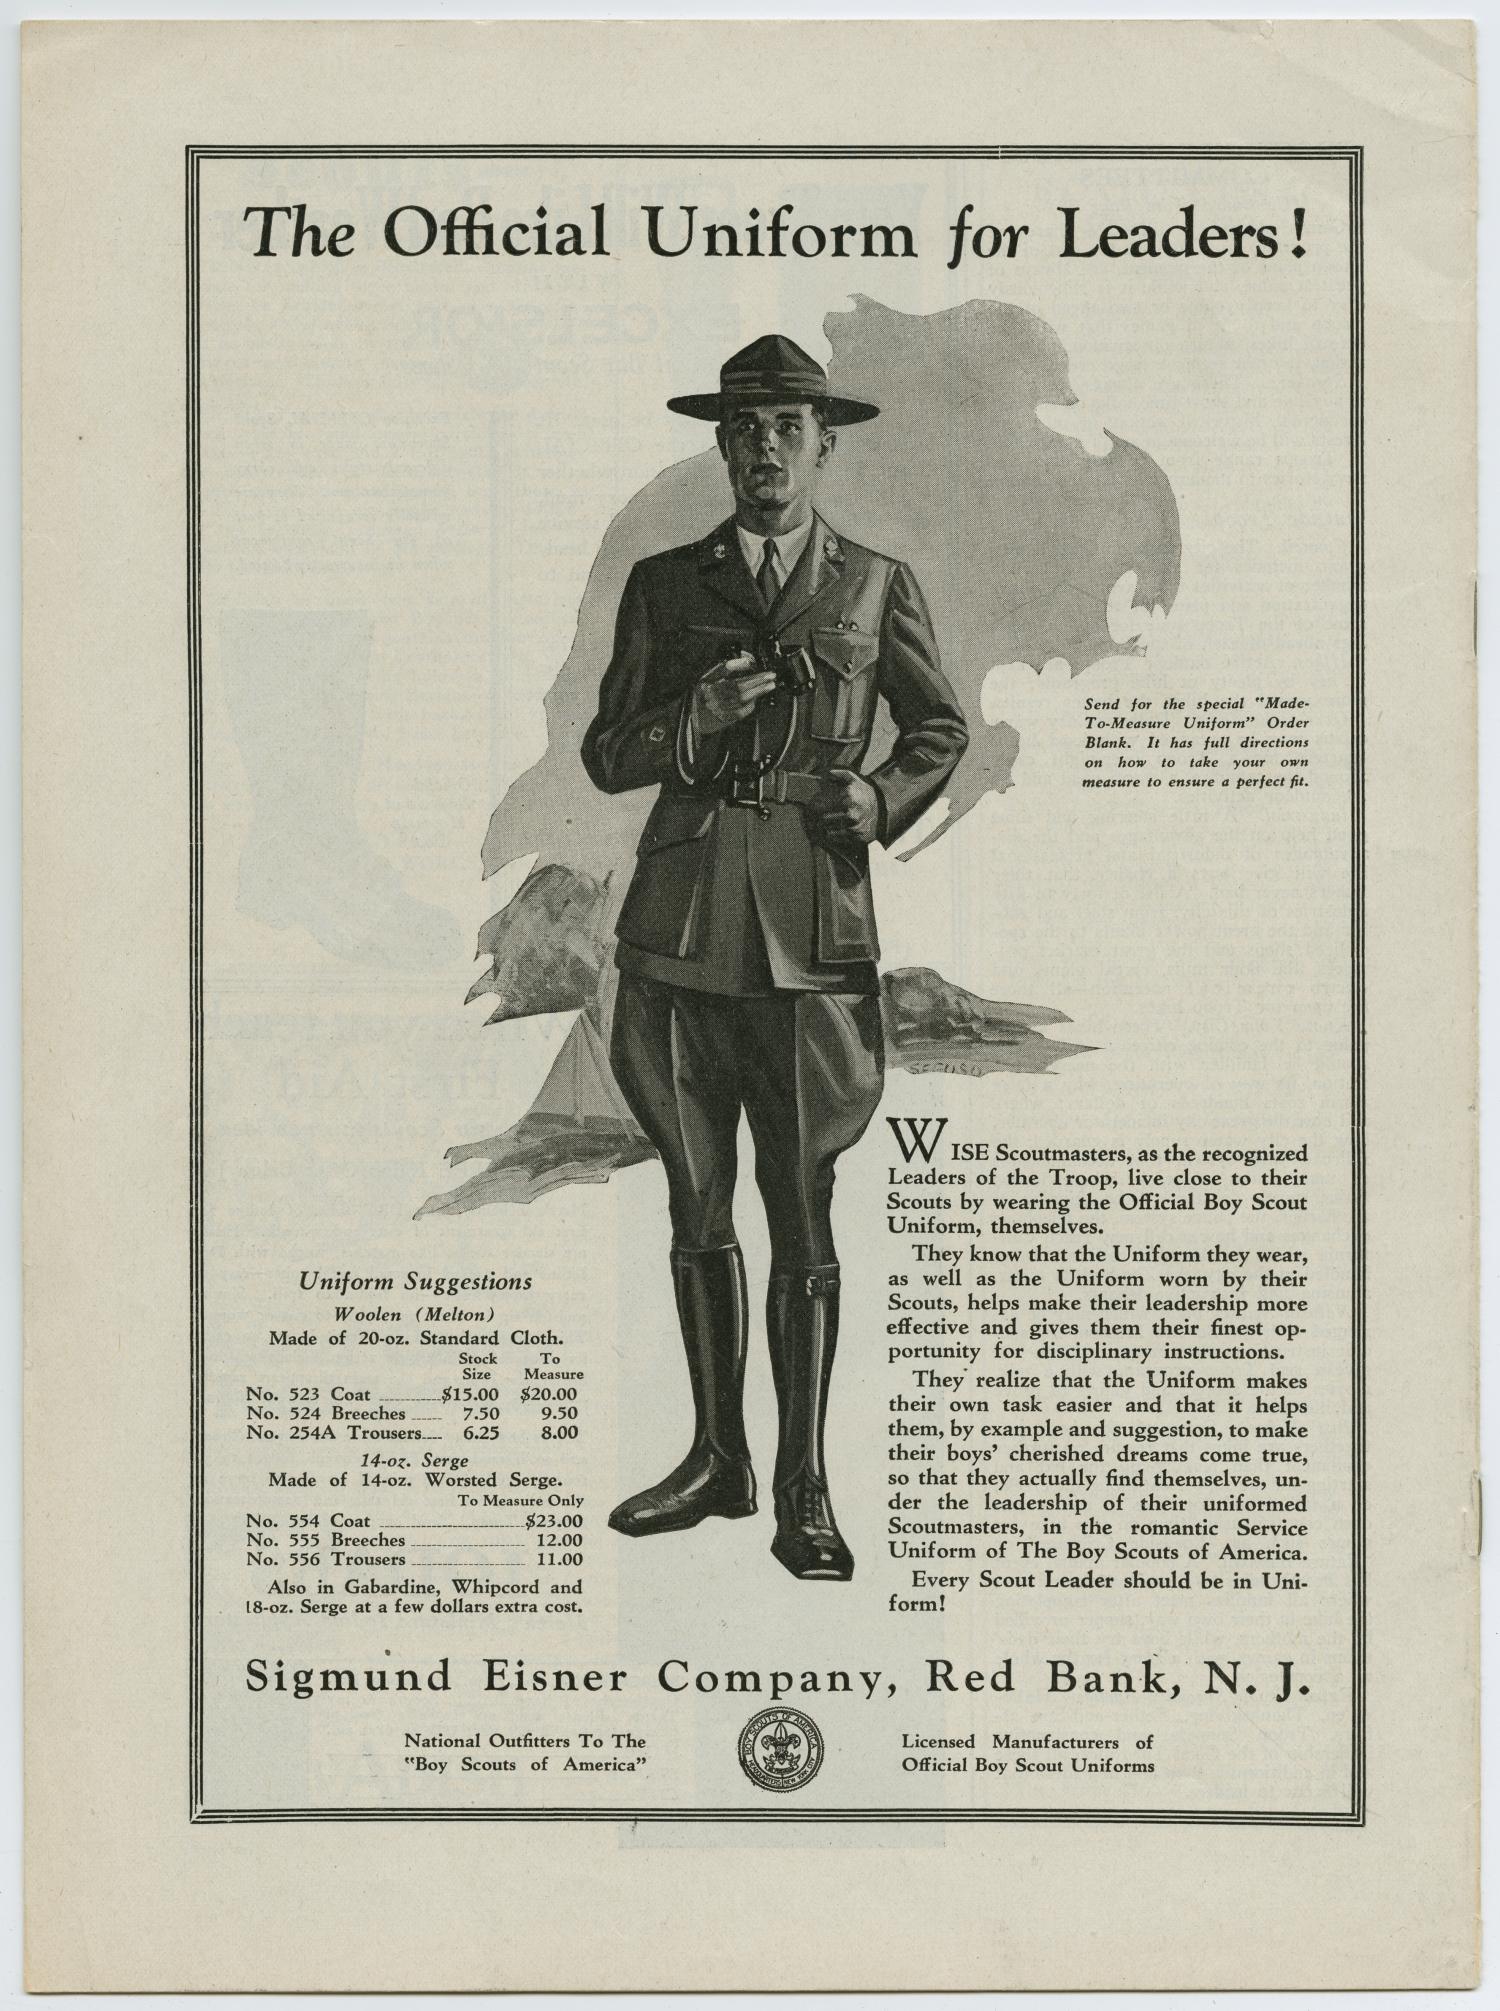 Scouting, Volume 18, Number 2, February 1930
                                                
                                                    56
                                                